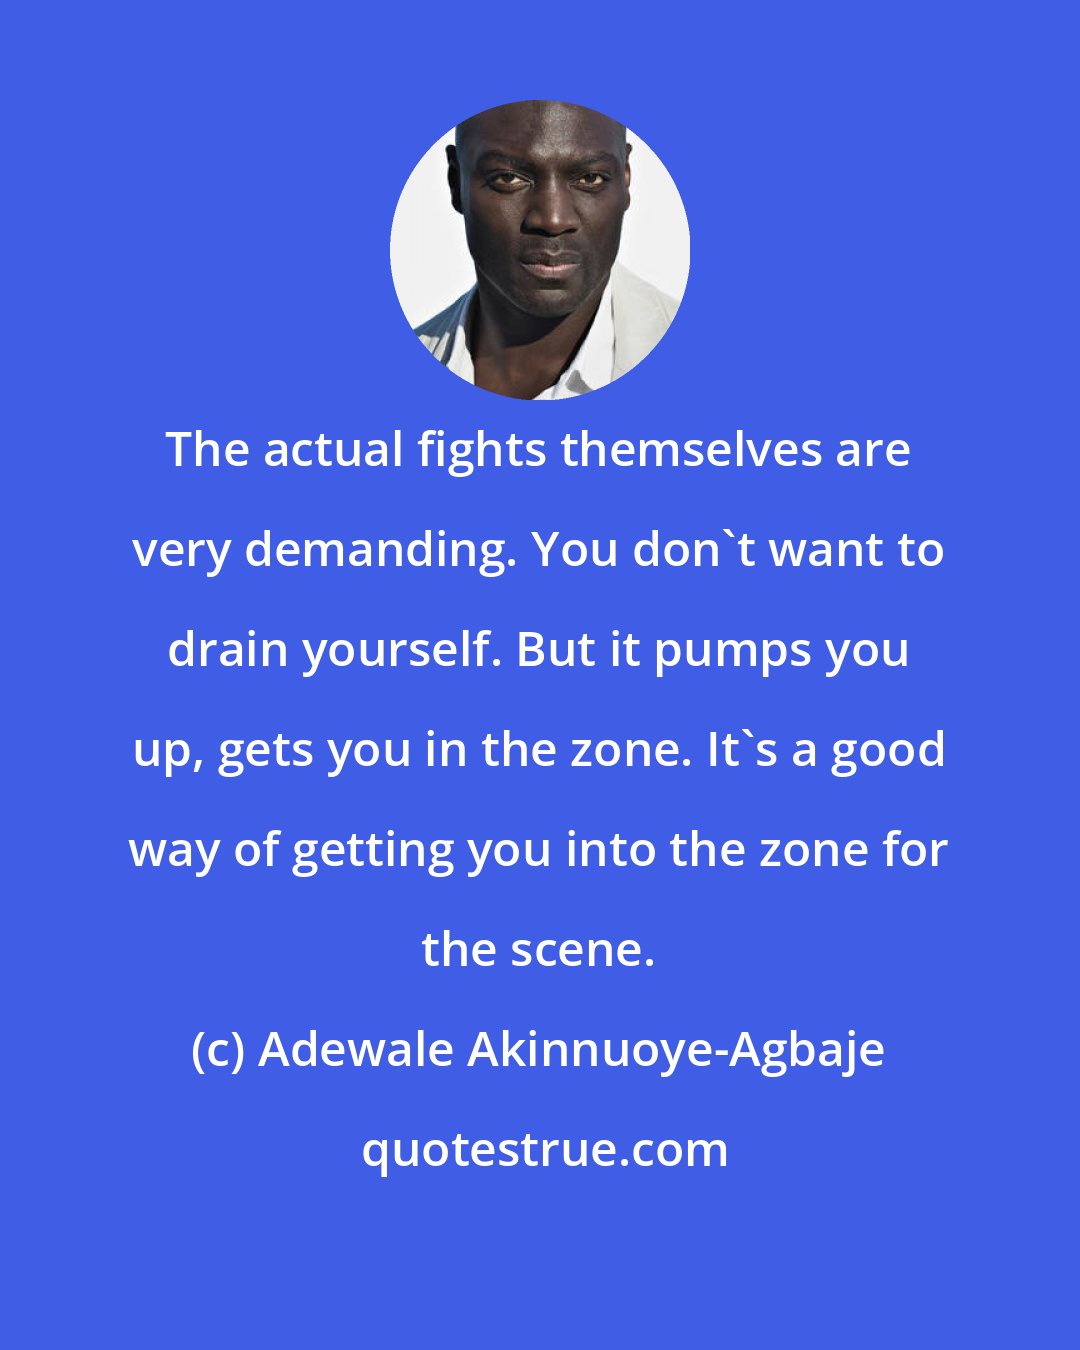 Adewale Akinnuoye-Agbaje: The actual fights themselves are very demanding. You don't want to drain yourself. But it pumps you up, gets you in the zone. It's a good way of getting you into the zone for the scene.